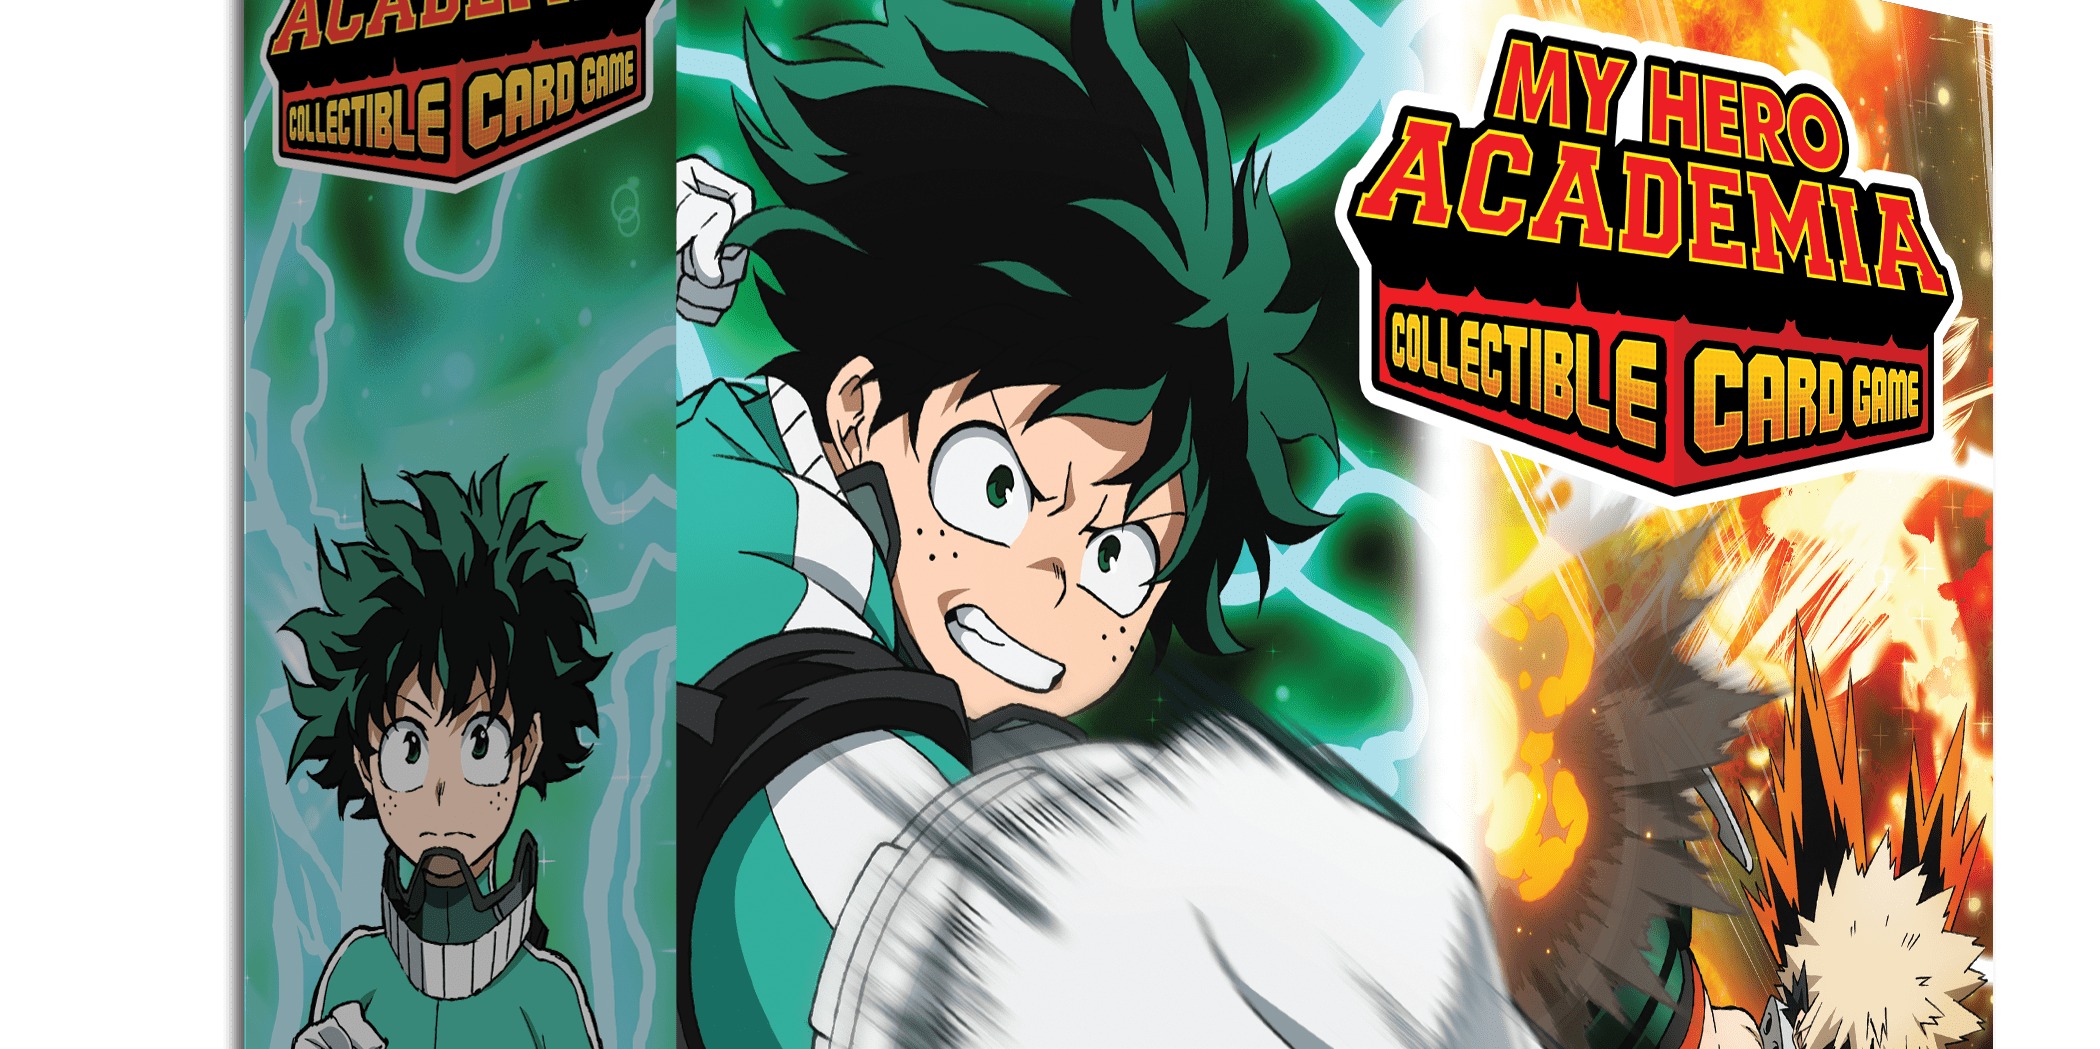 Asmodee dazzles with My Hero Academia game and other deals